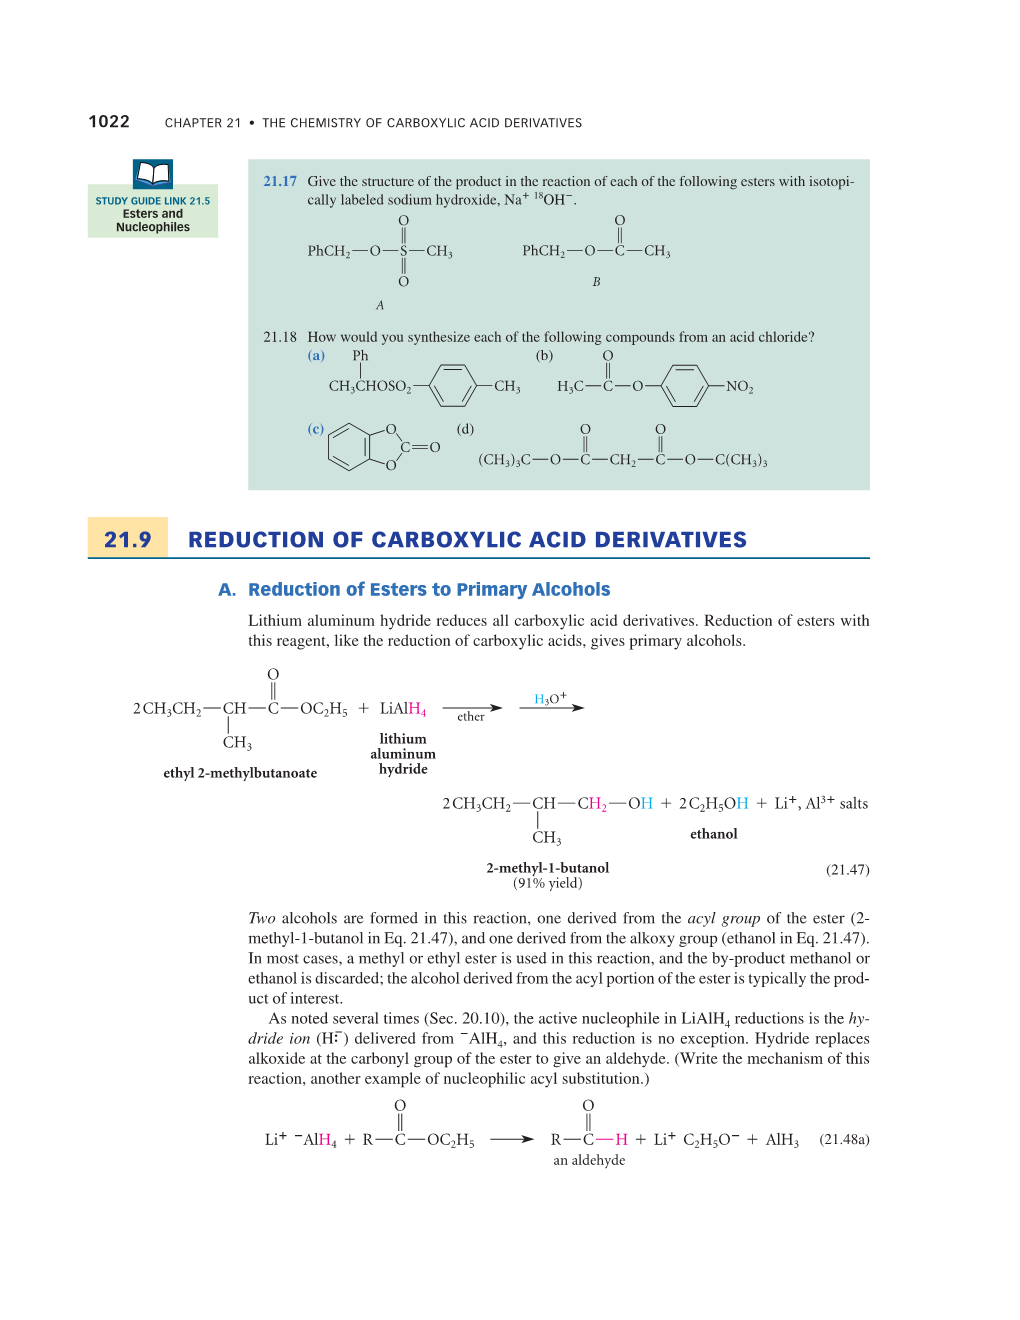 21.9 Reduction of Carboxylic Acid Derivatives